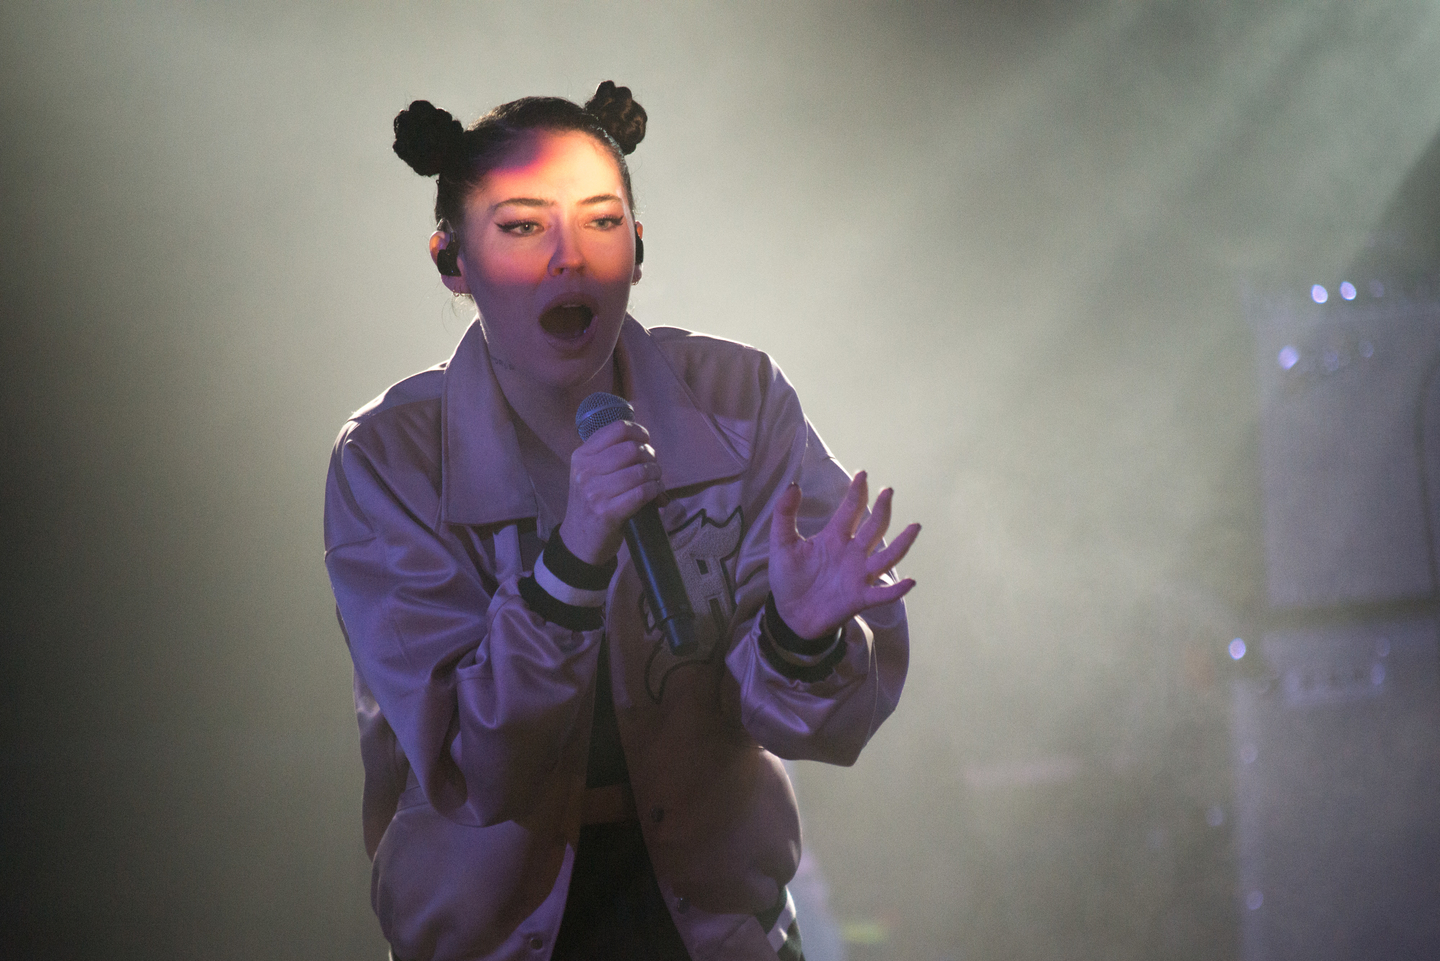 Bishop Briggs, presented by SoundExchange Sessions. Photo by Karl Capelli